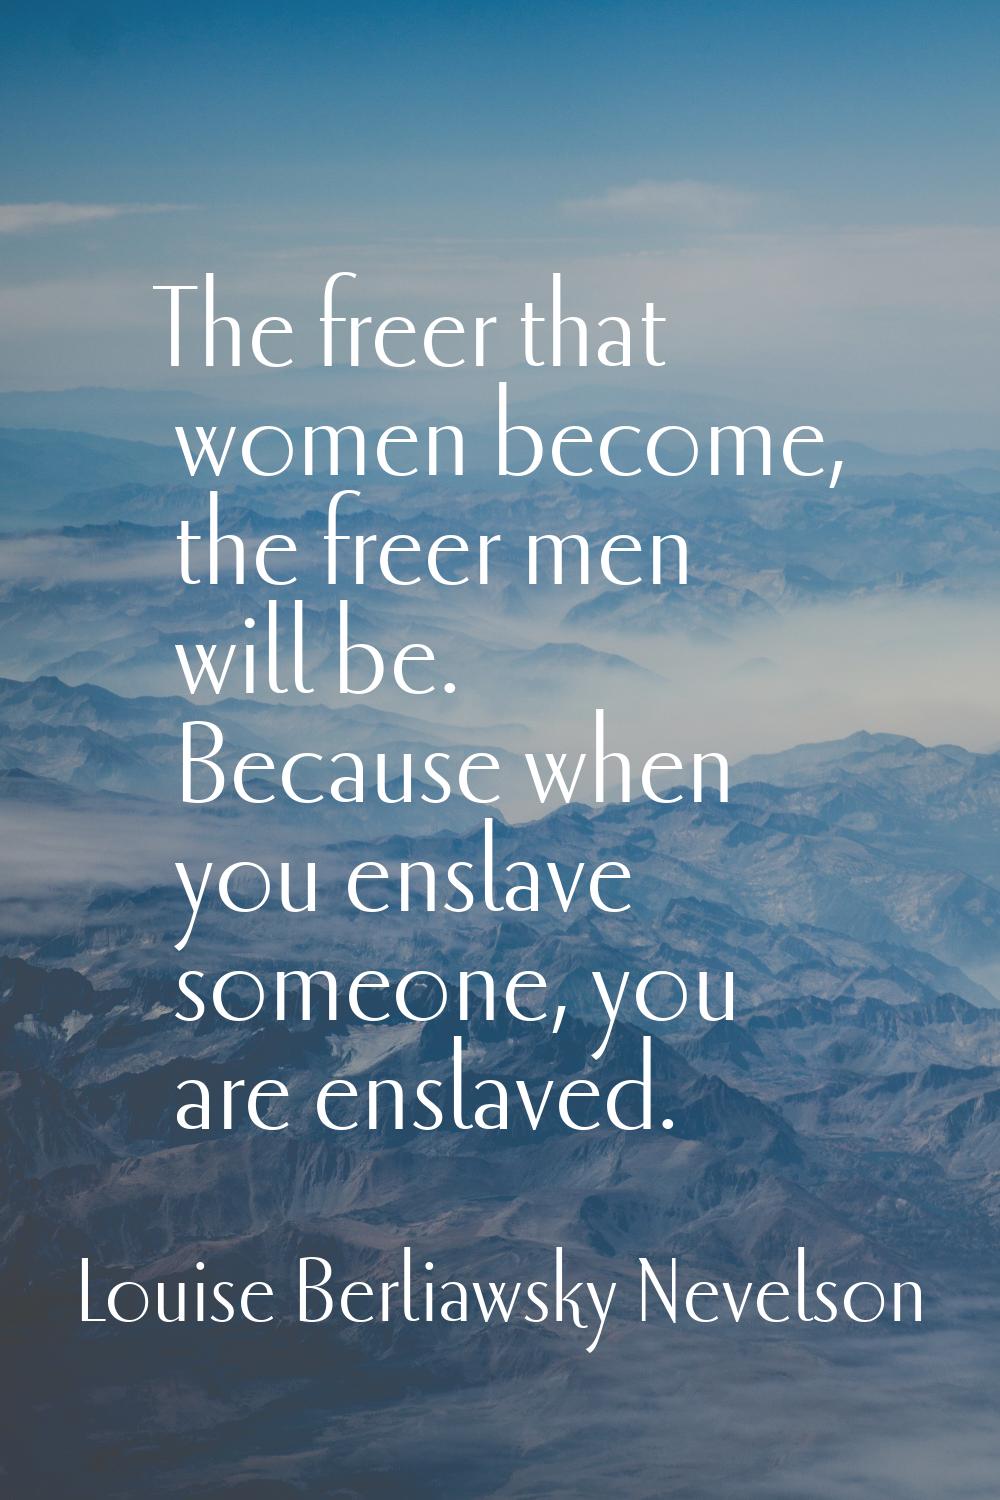 The freer that women become, the freer men will be. Because when you enslave someone, you are ensla